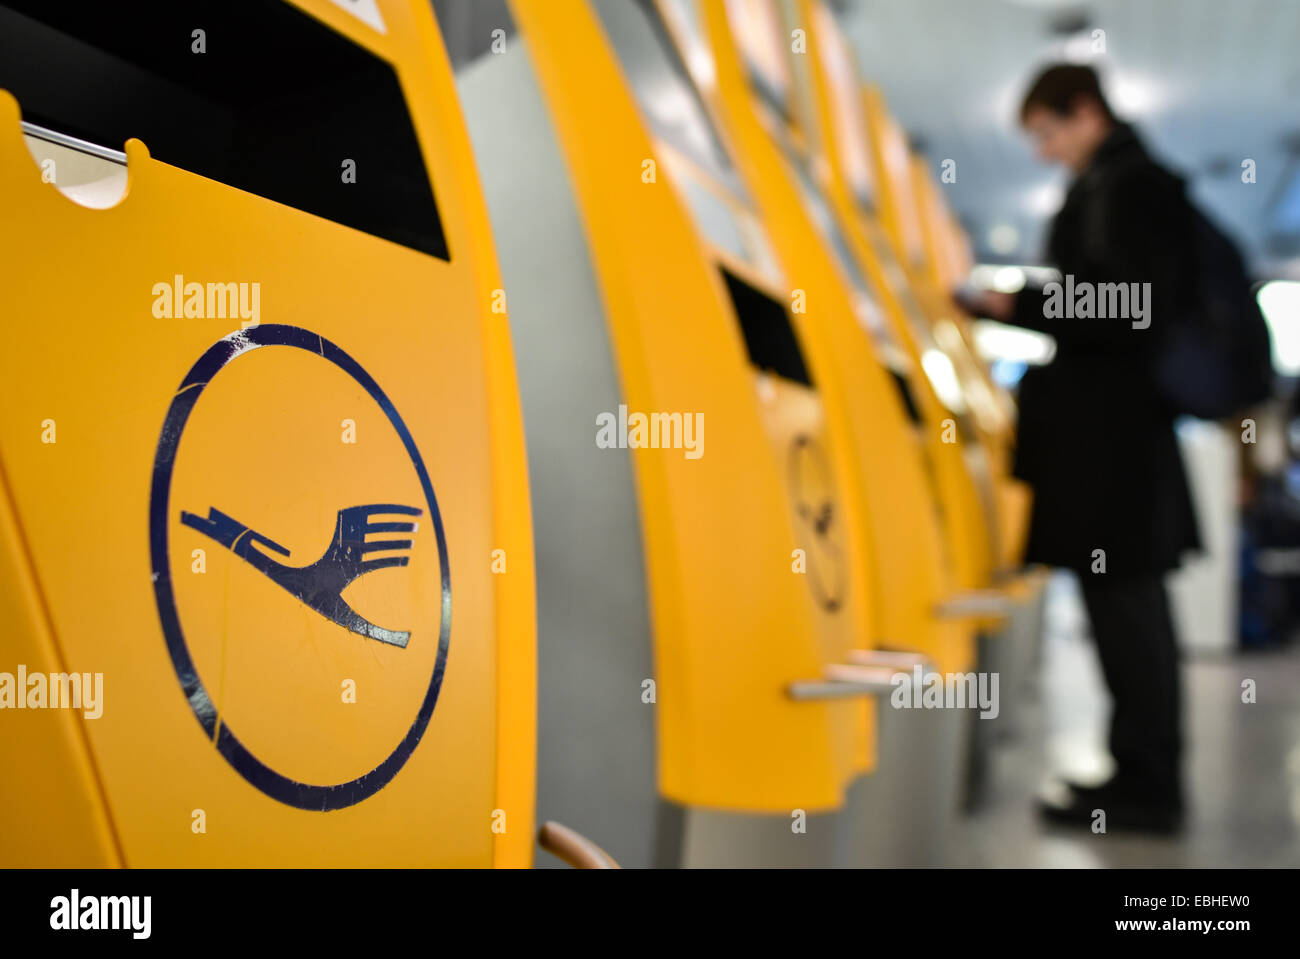 Hanover, Germany. 01st Dec, 2014. The Lufthansa logo at empty check-ins at the airport in Hanover, Germany, 01 December 2014. The pilots union Vereinigung Cockpit (VD) announced the strike in Germany on Monday from 12:00 pm to 11:59 pm. Photo: OLE SPATA/dpa/Alamy Live News Stock Photo